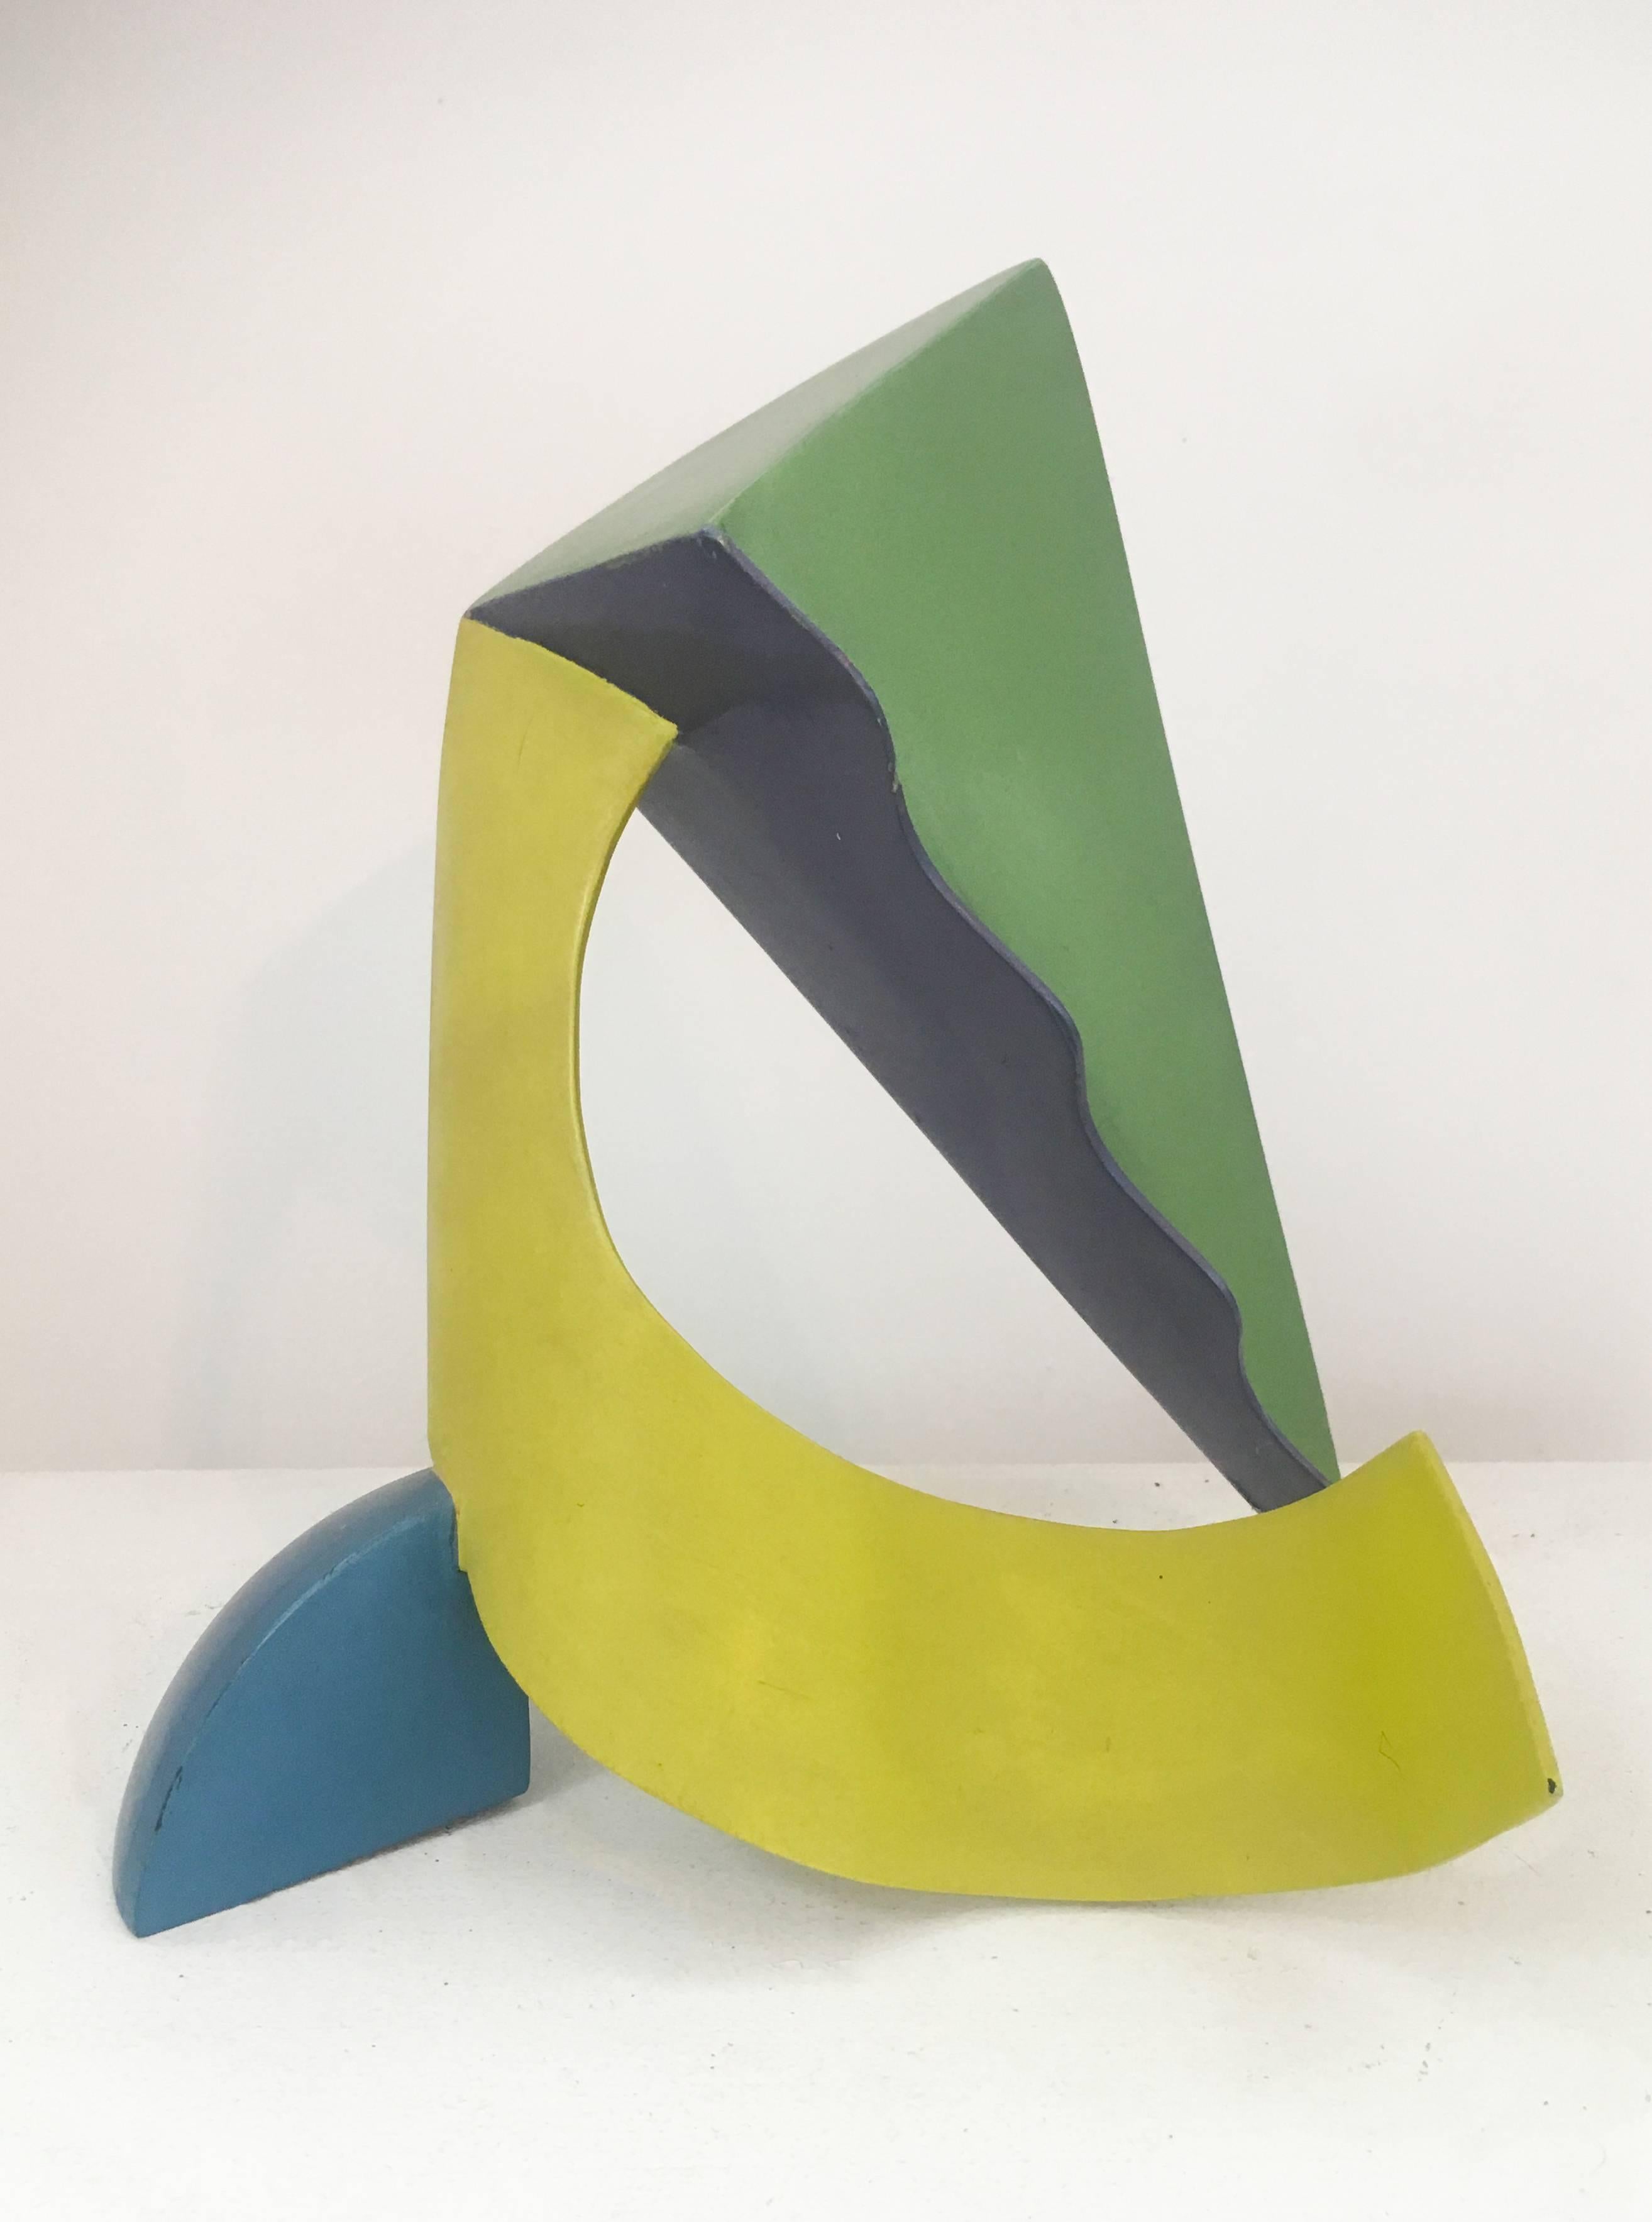 Calypso (Colorful Abstract Mid Century Modern Sculpture in Yellow, Blue & Green)